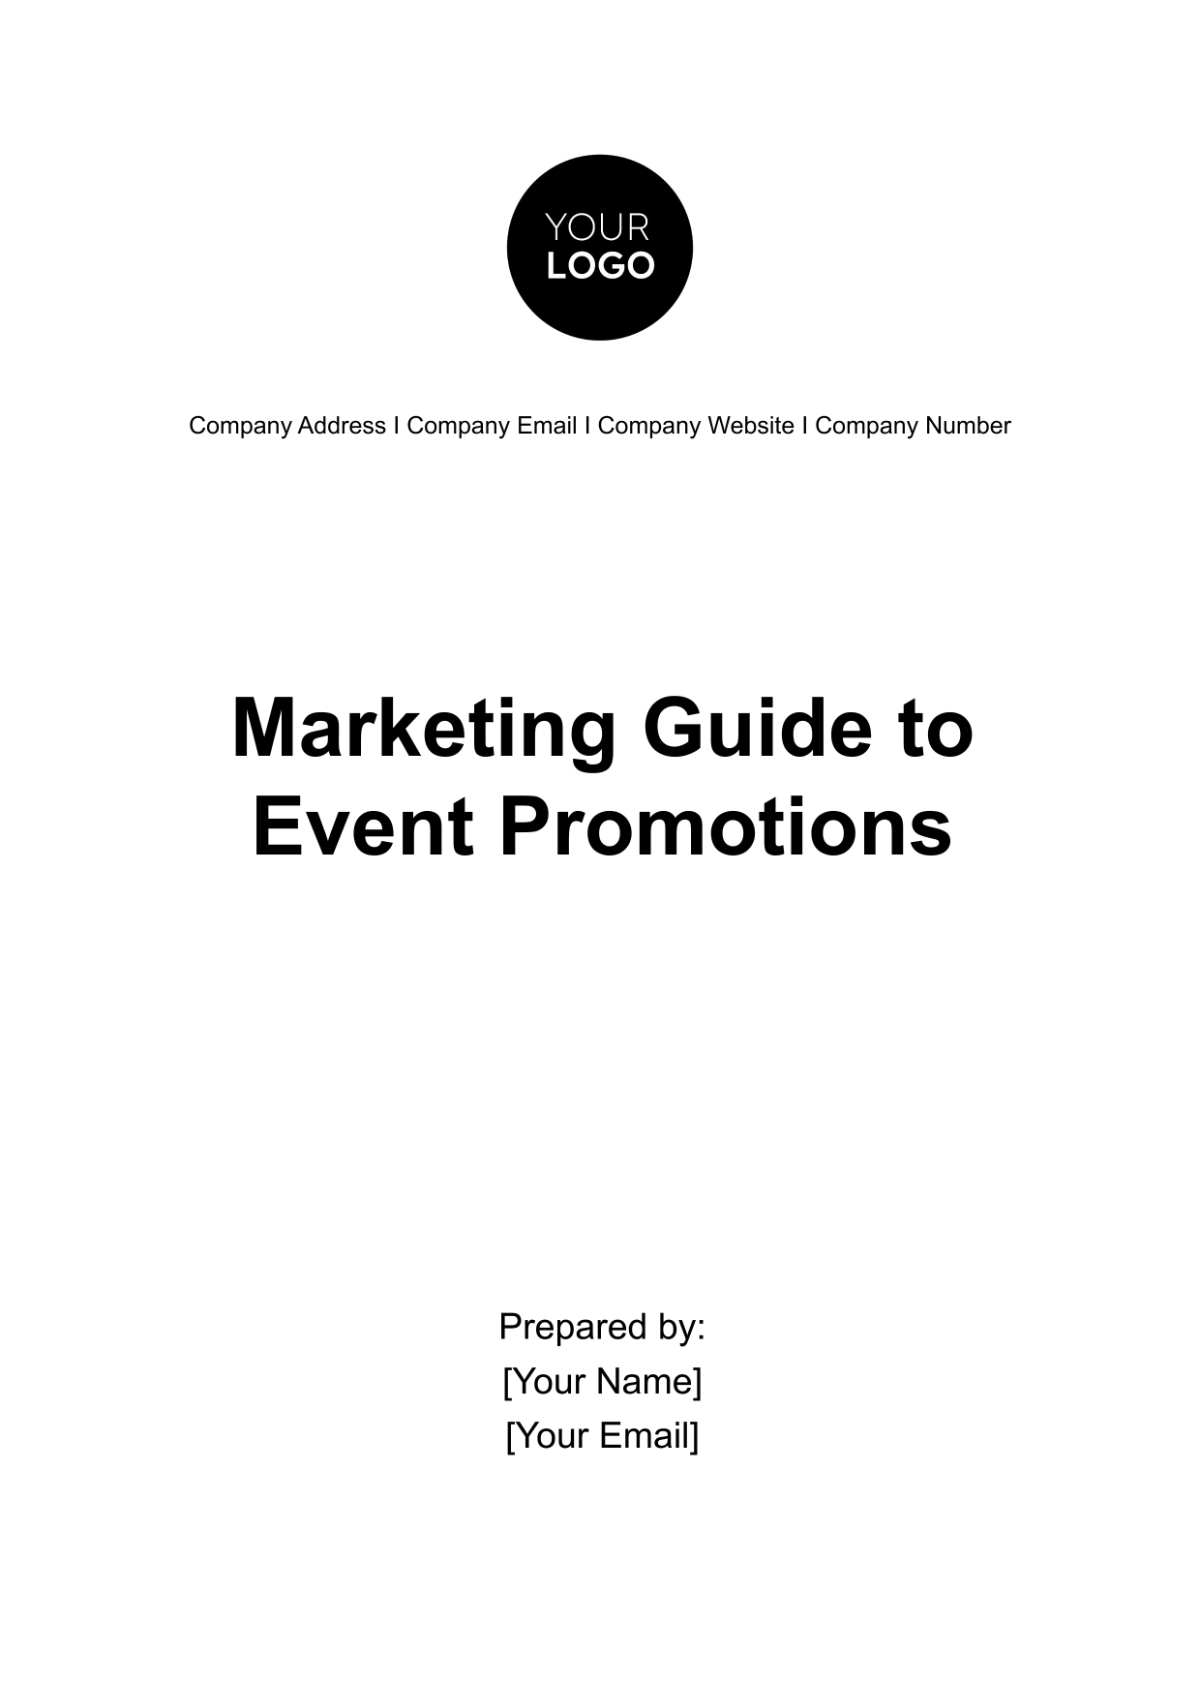 Marketing Guide to Event Promotions Template